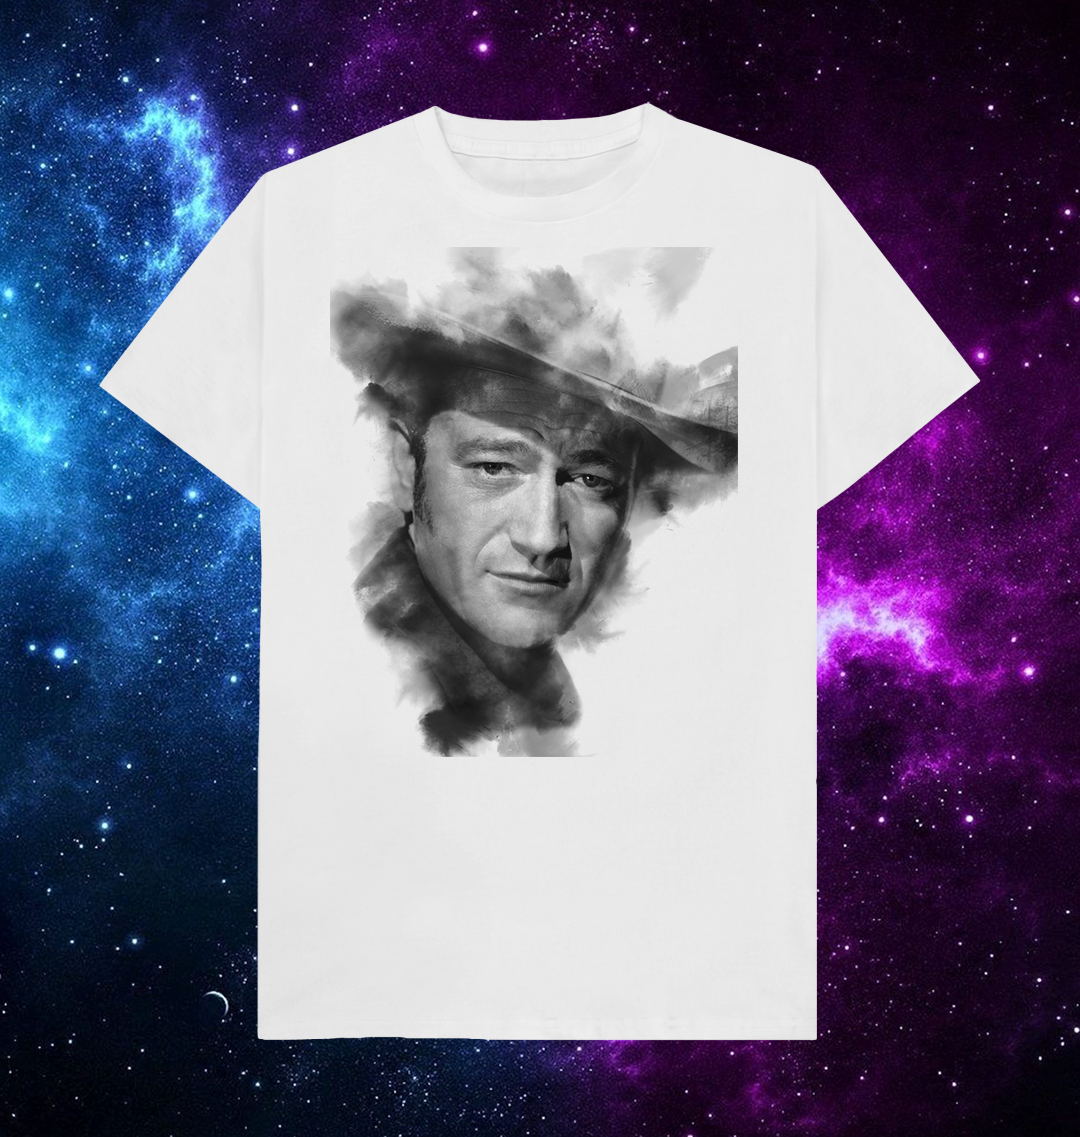 John Wayne in Charcoal by TinselTown Limited Artist T-Shirt